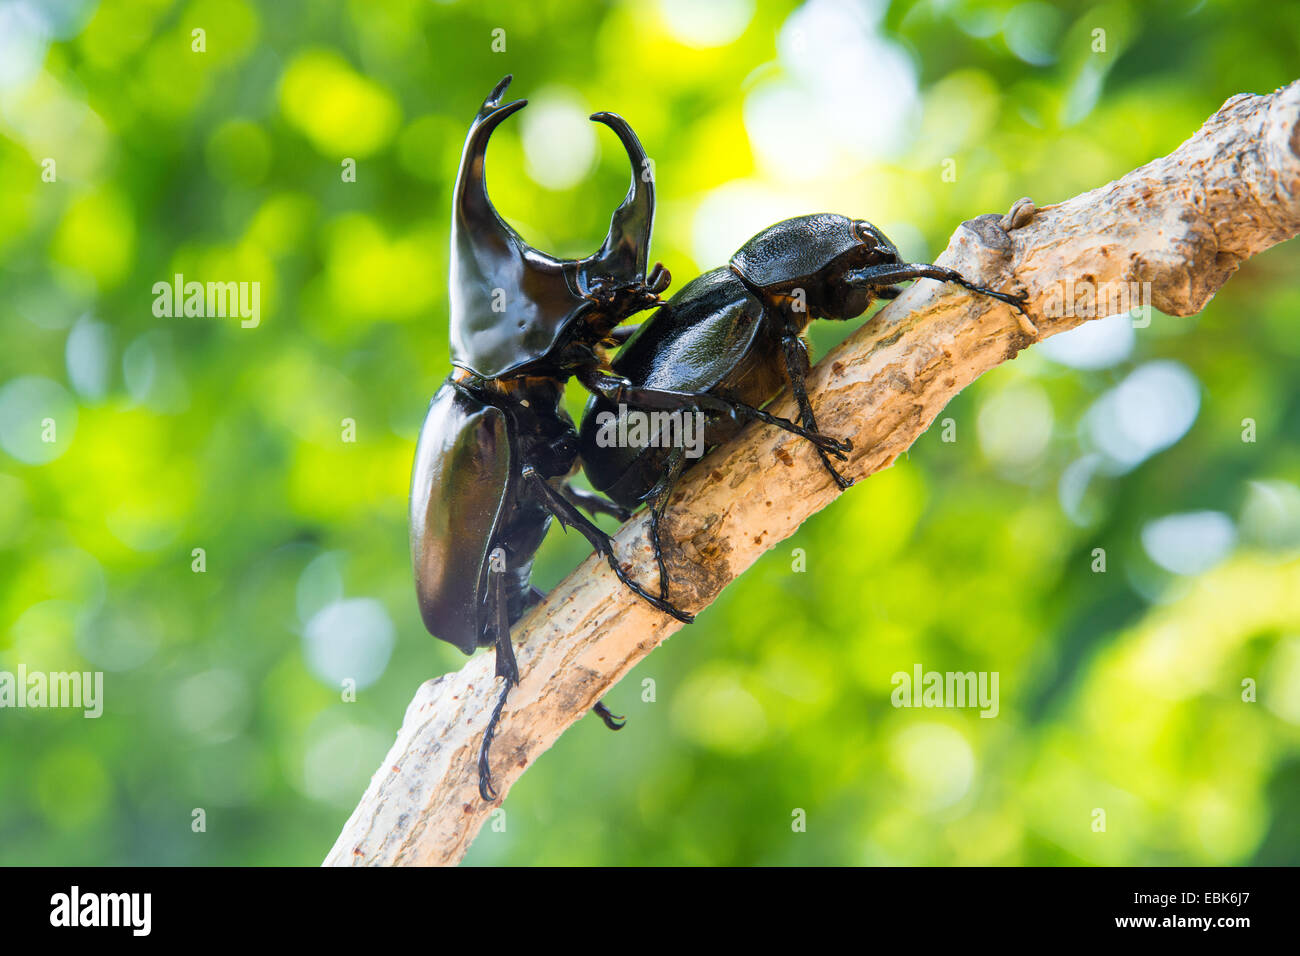 Stag beetle on tree Banque D'Images